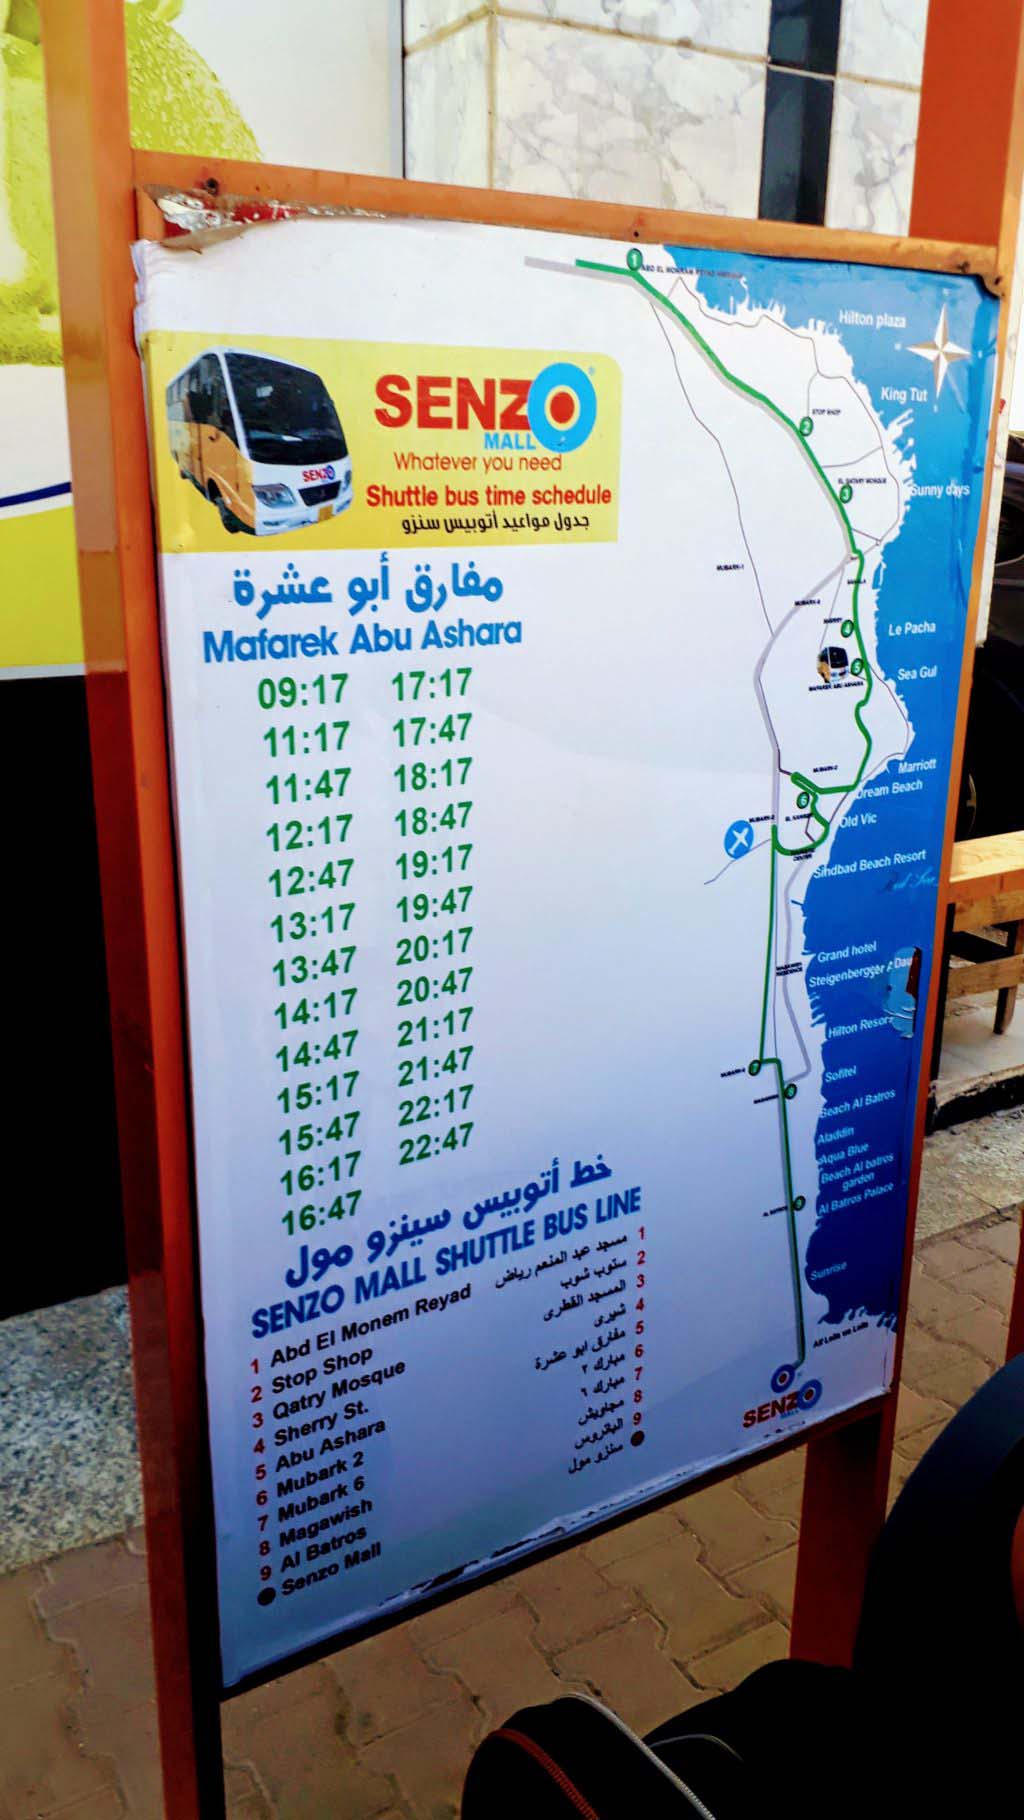 Timetable of the Senzo Mall shuttle bus in Hurghada